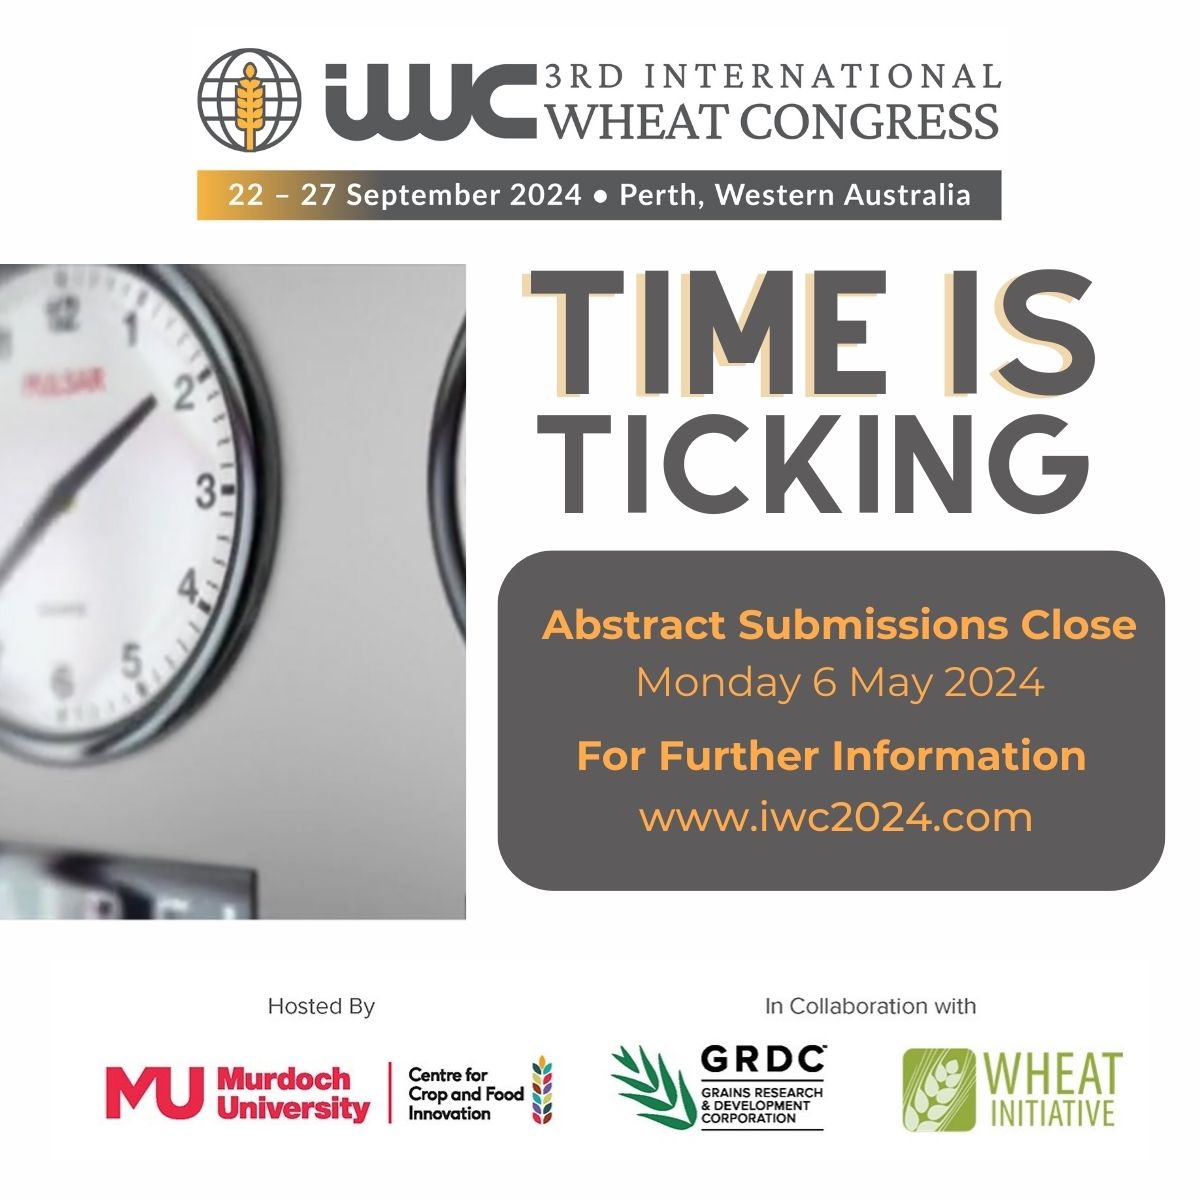 '🌾 Unleash your wheat wizardry at the #iwc2024perth in vibrant Australia! ⏰ Time is ticking, don't miss the deadline for abstract submissions on Monday 6 May 2024! 📝🗓️ Get all the juicy details at iwc2024.com and be part of the groundbreaking event.